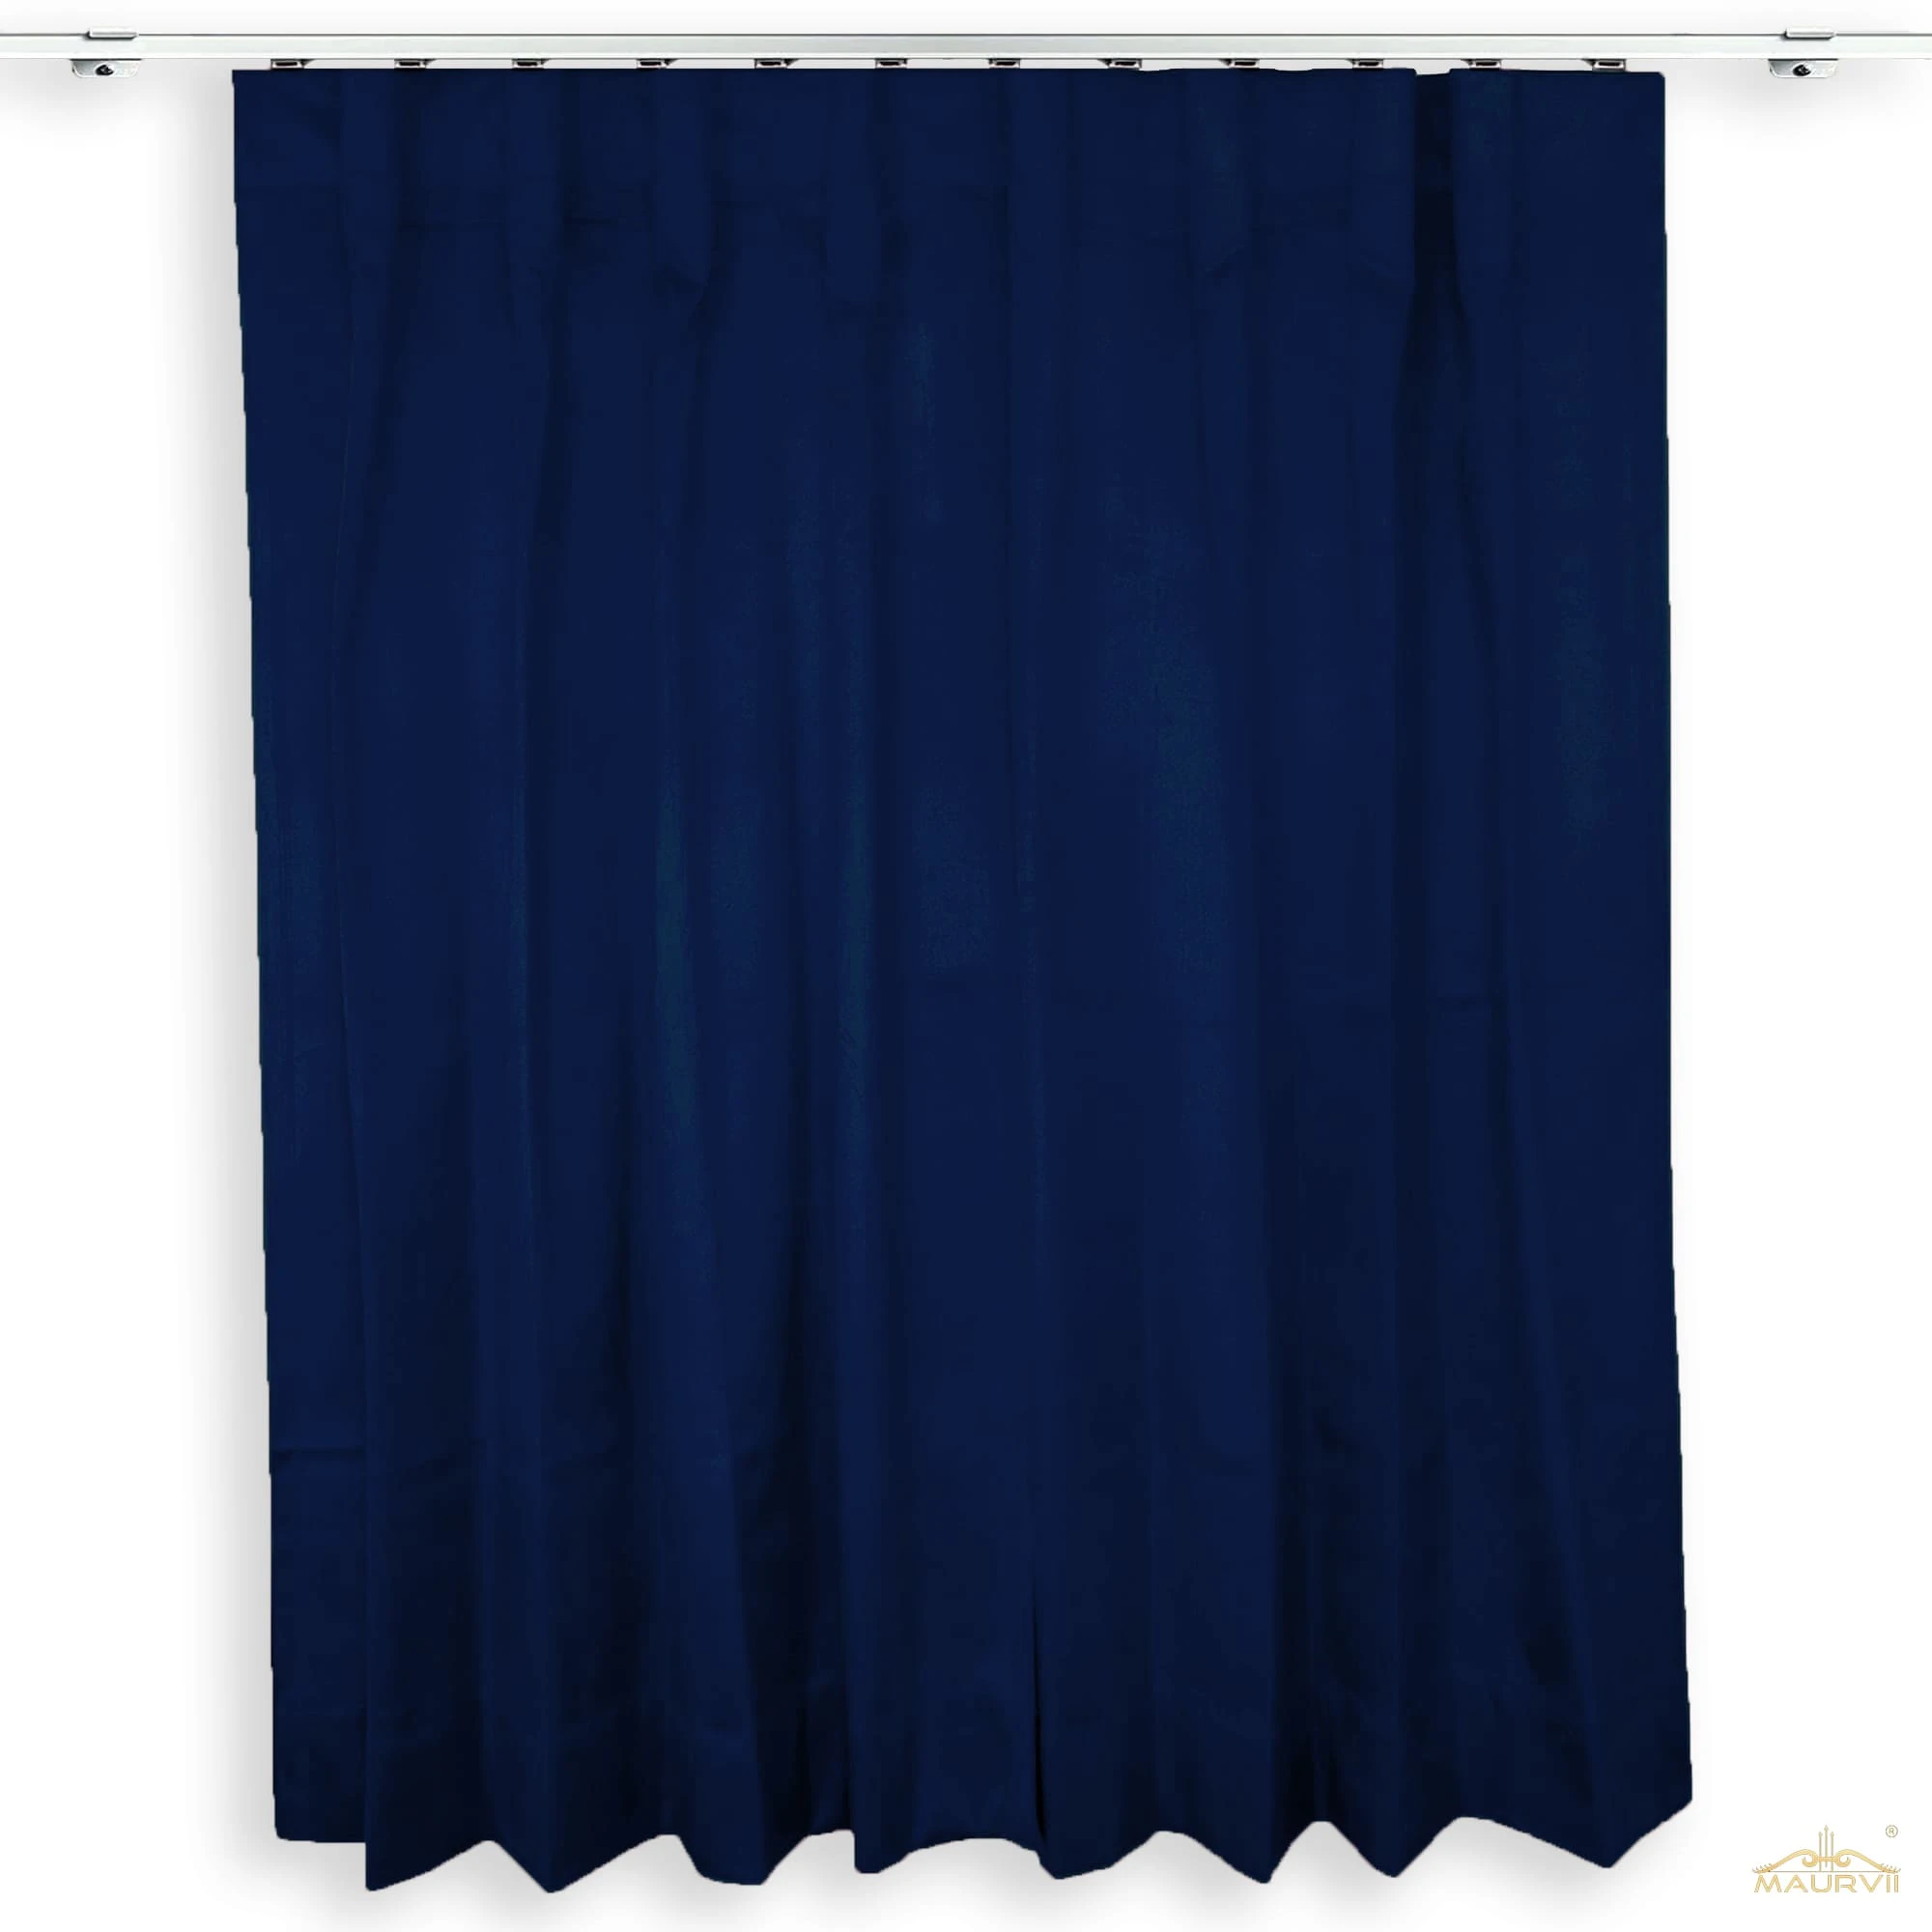 Navy Blue color curtains